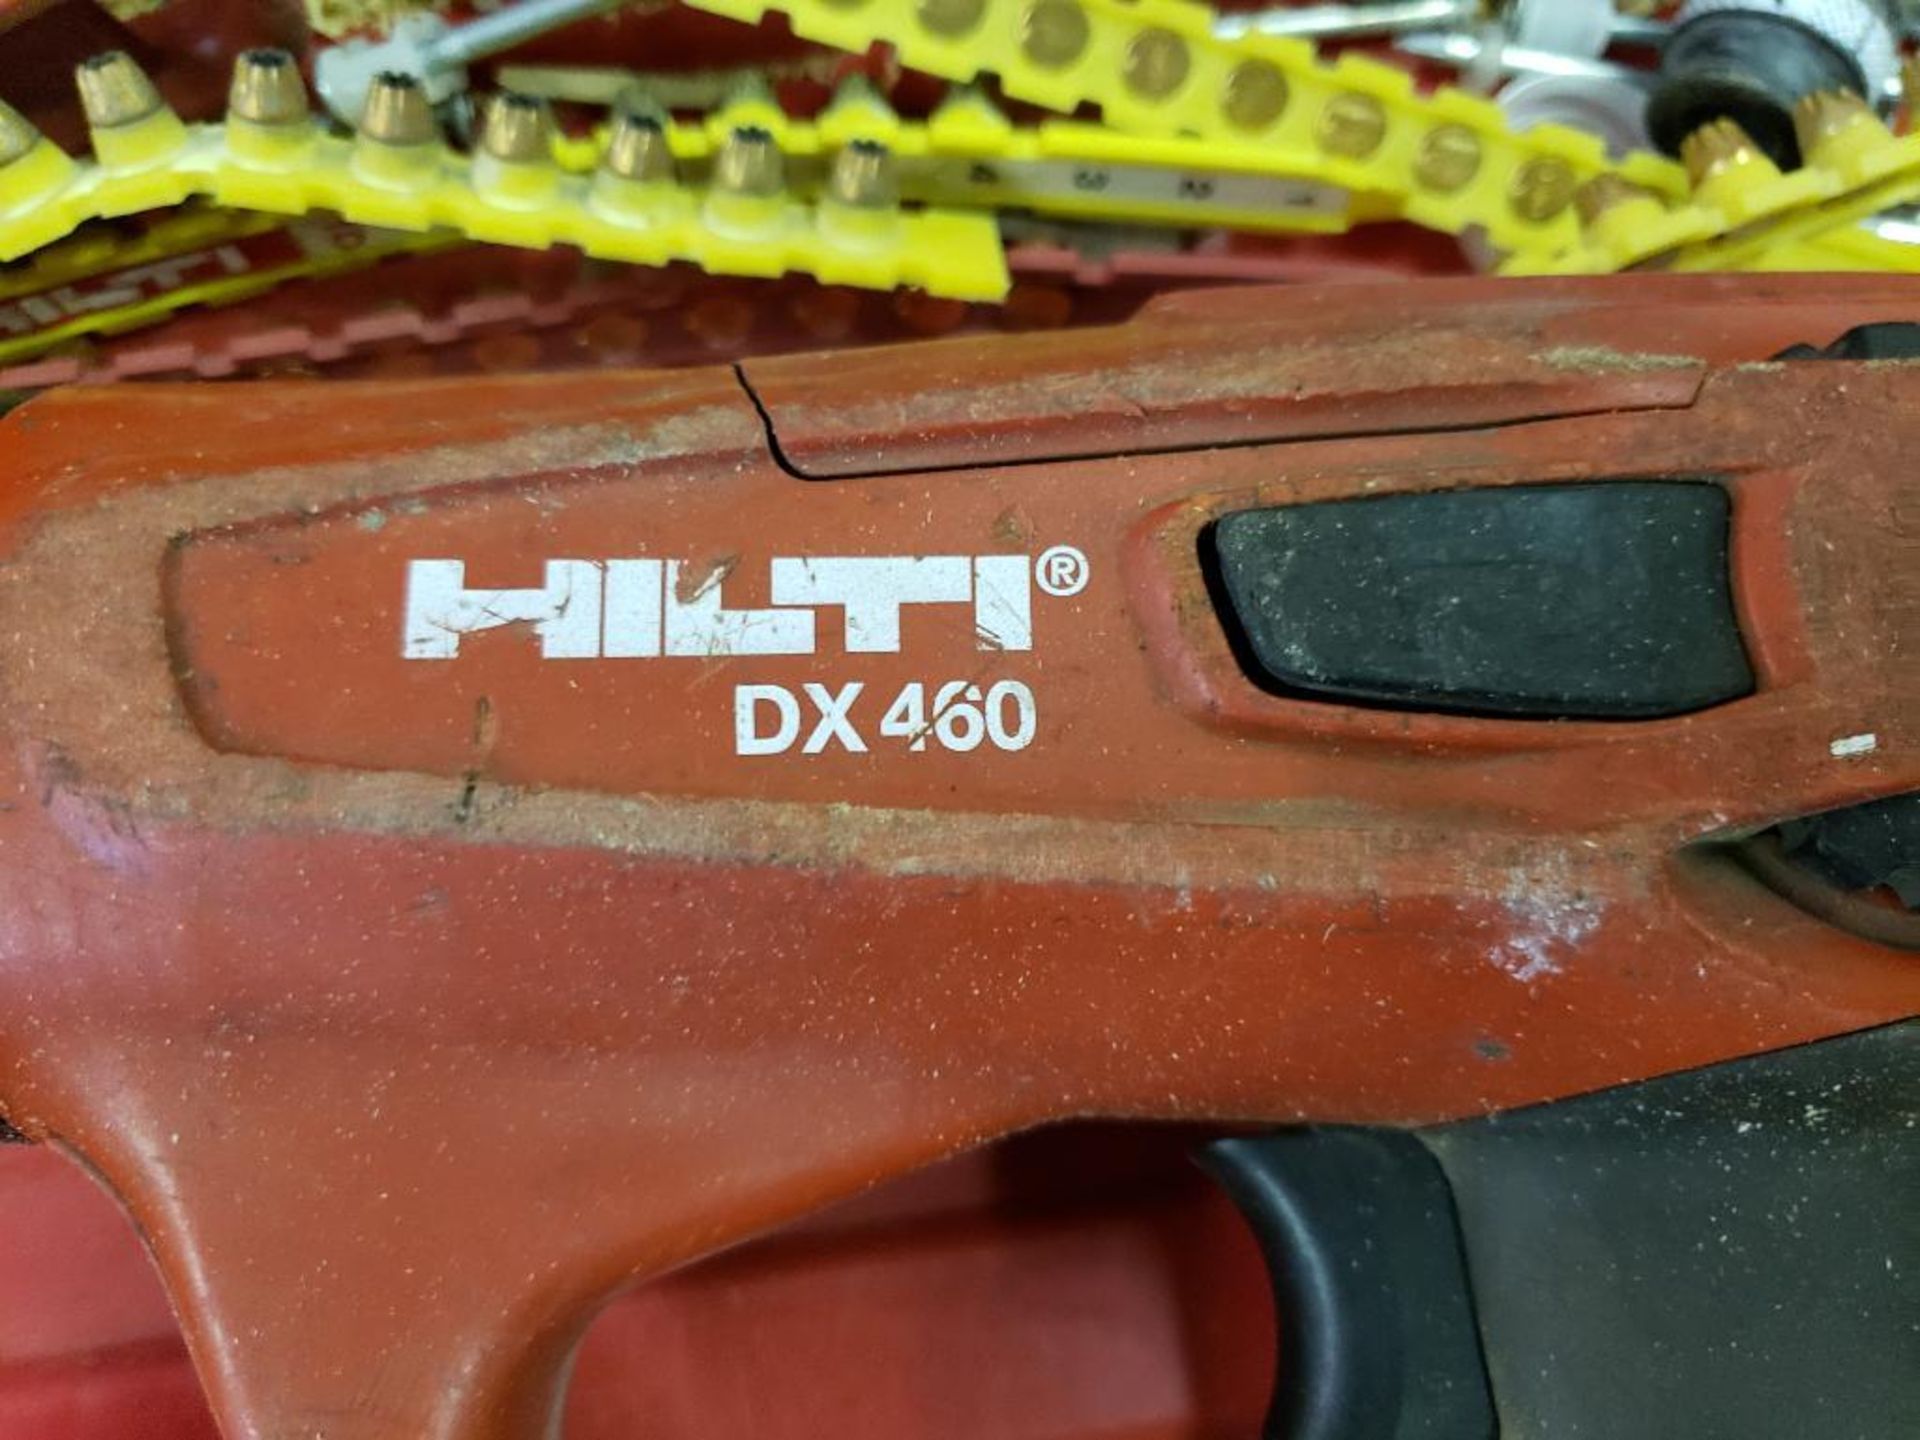 Hilti DX460 powder actuated fastening tool, with MX72 nail magazine. - Image 7 of 8